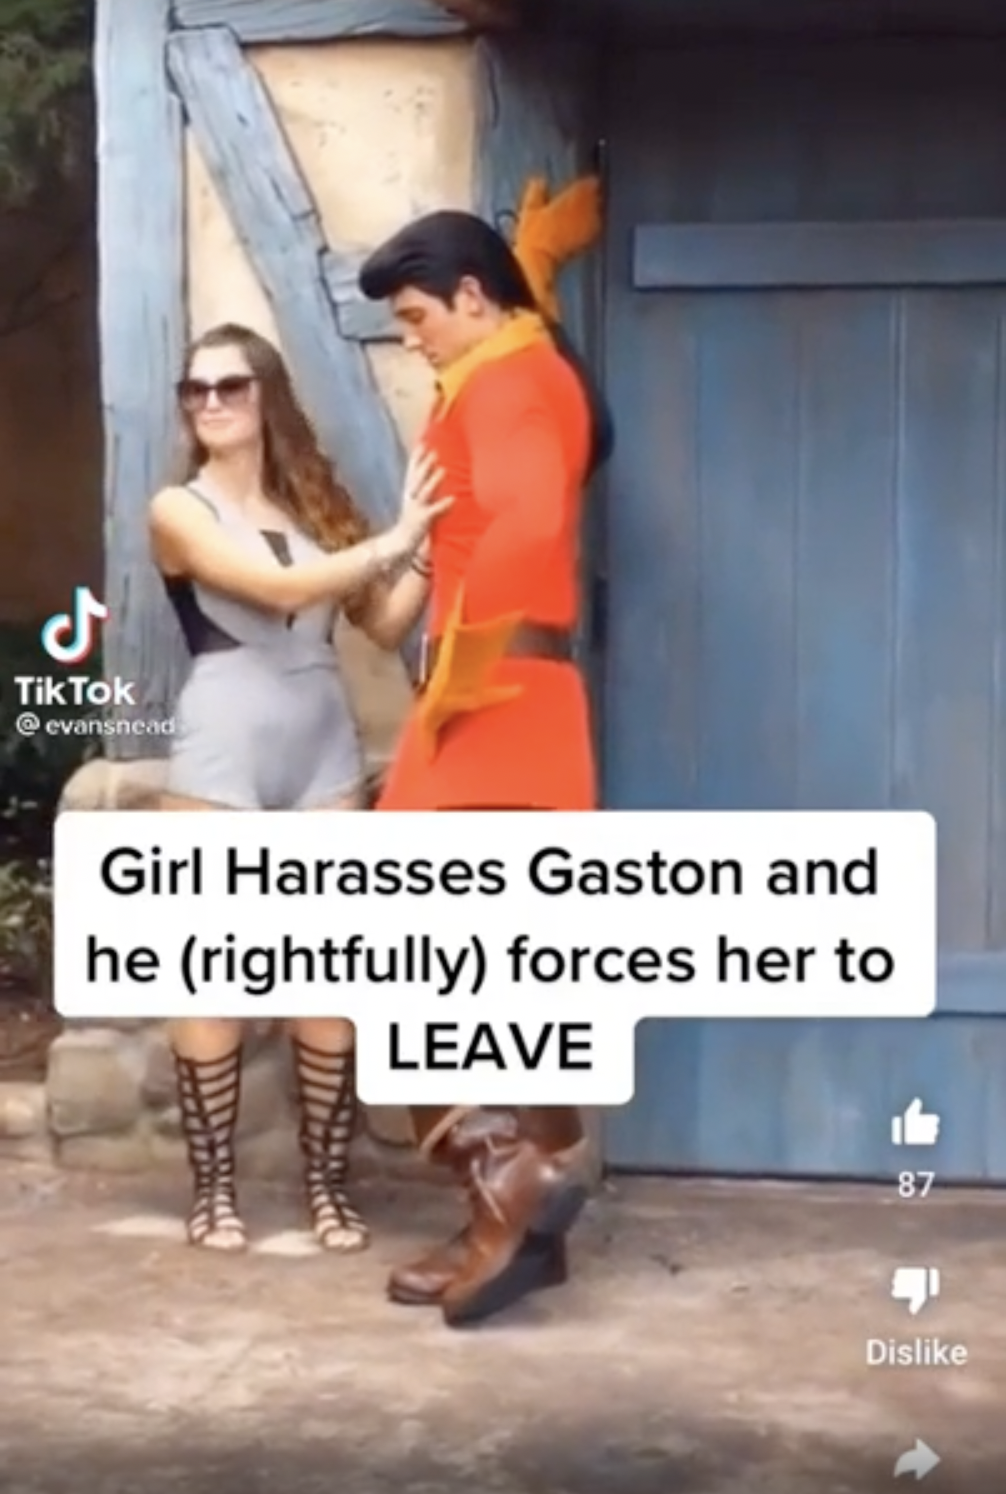 photo caption - Tik Tok evanshead Girl Harasses Gaston and he rightfully forces her to Leave Dis